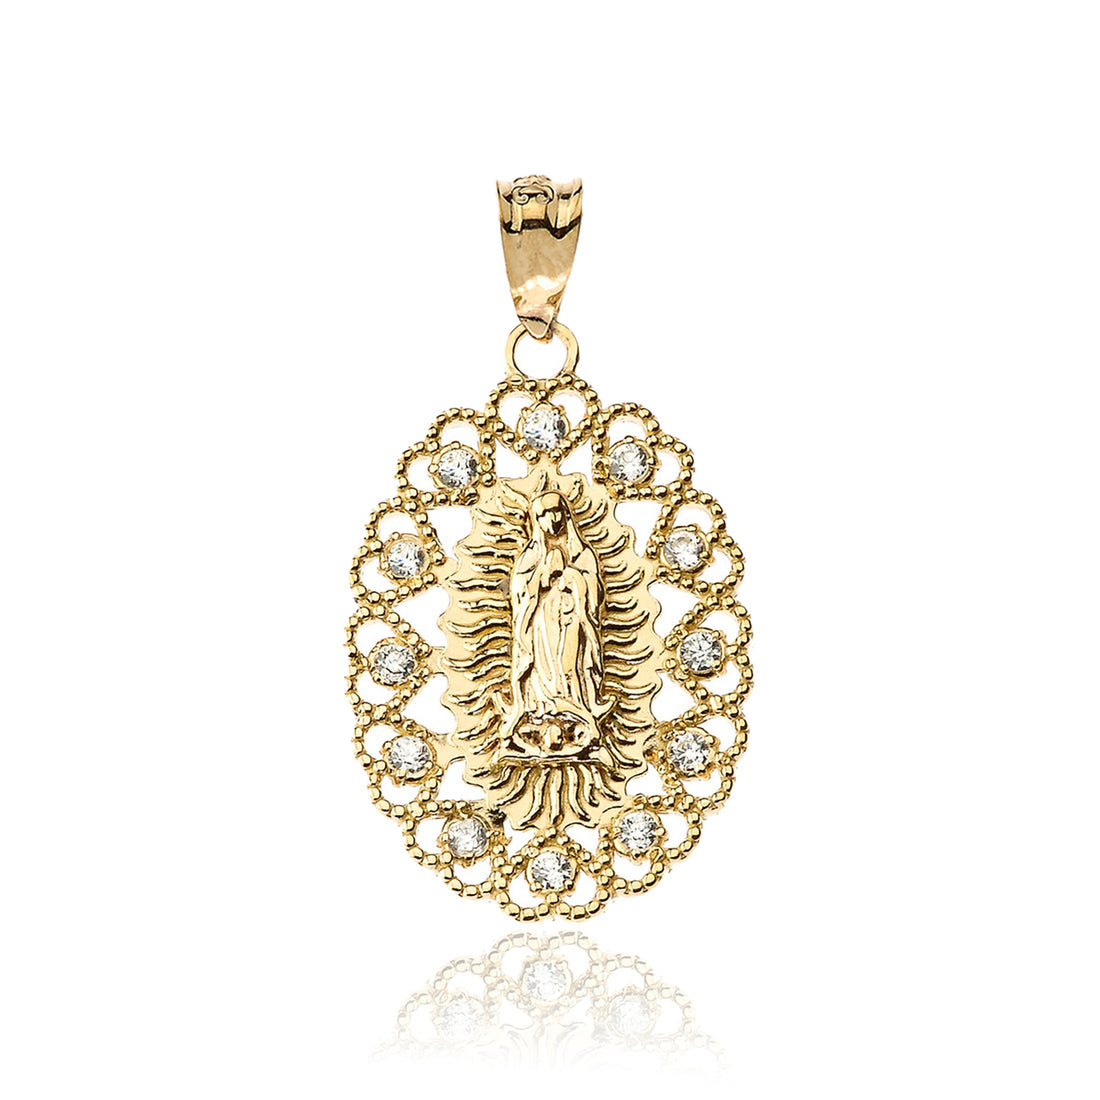 Gold Virgin Mary Our Lady of Guadalupe Filigree CZ Pendant Necklace Karma Blingz